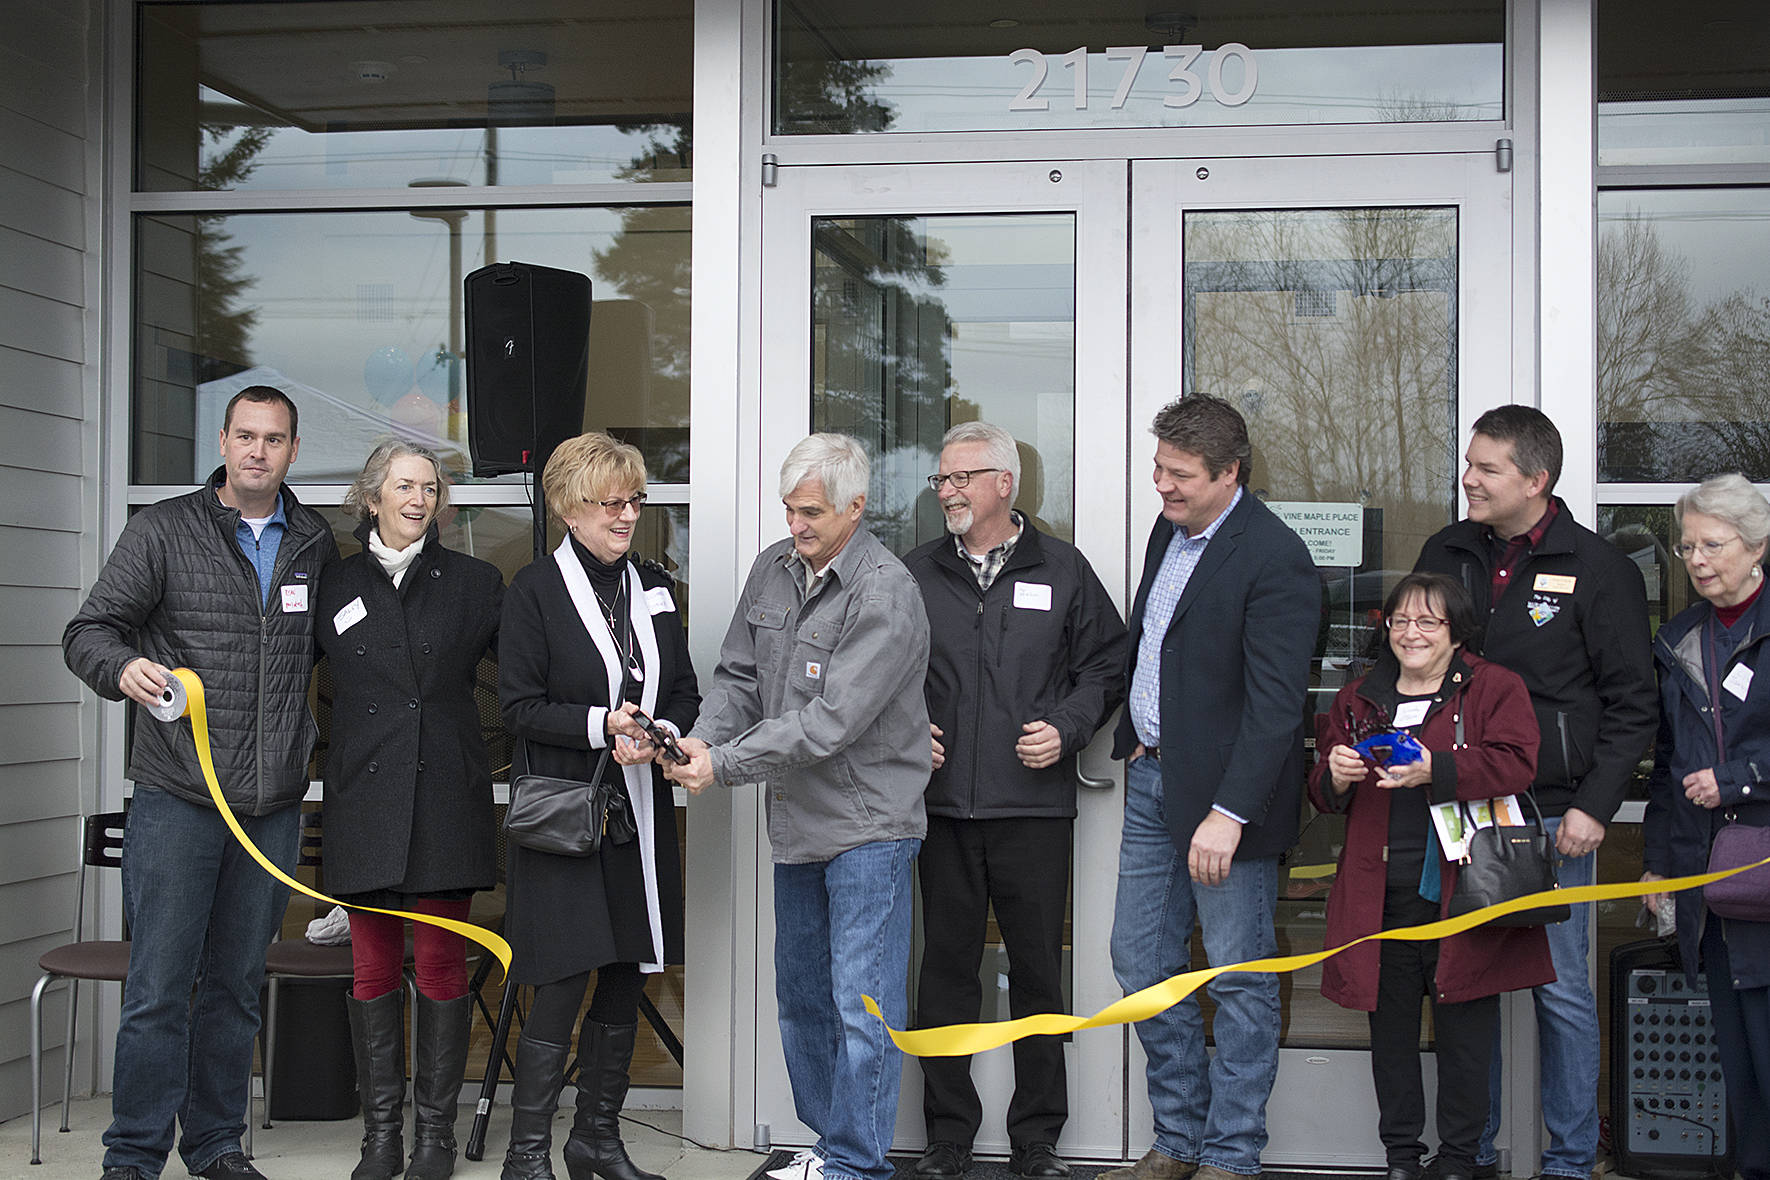 Vine Maple Place opened its doors to its new resource center located in Maple Valley on Dec. 8. To celebrate, there was a ribbon cutting and a tour of the new facility. Photo by Kayse Angel